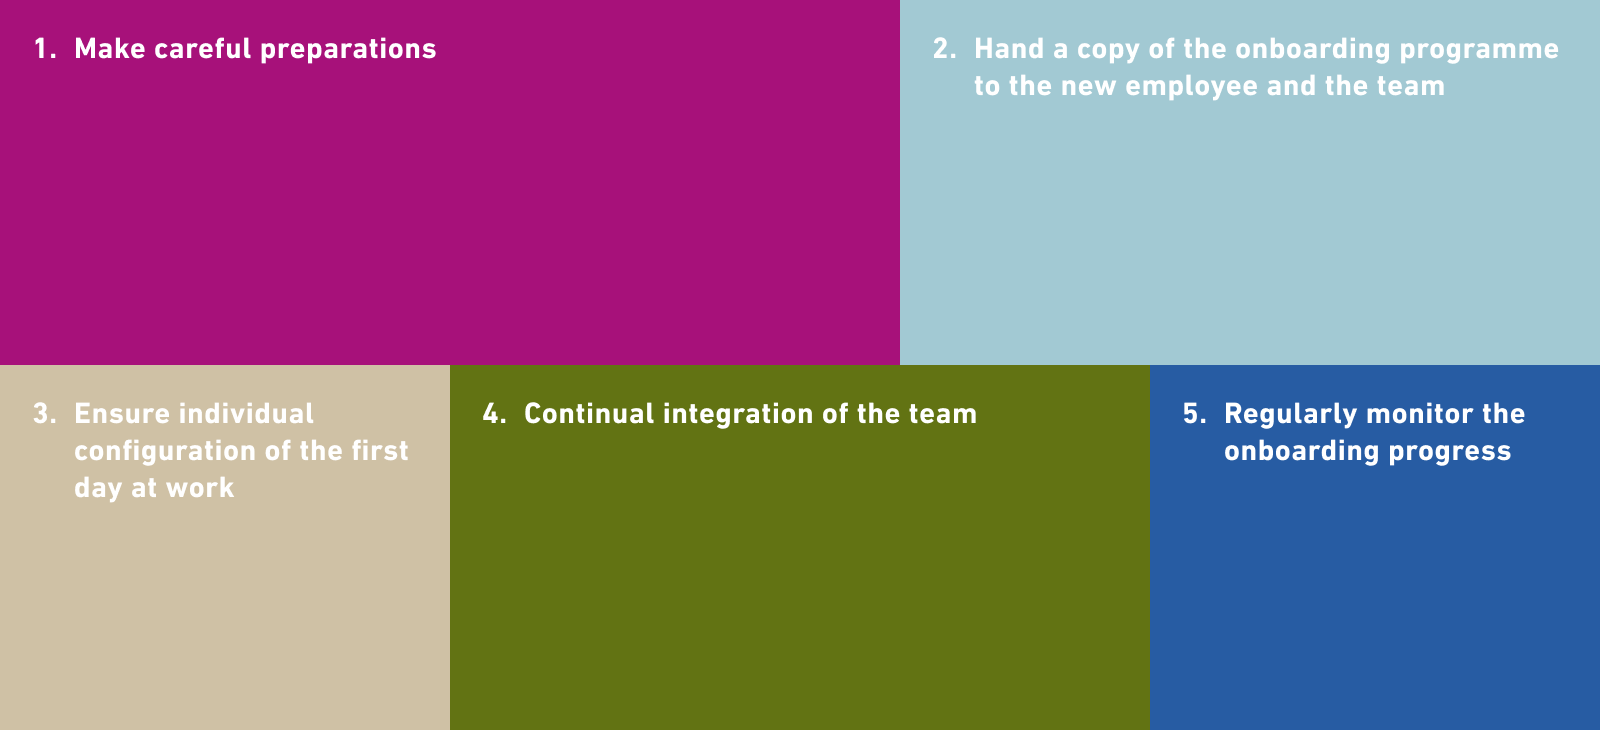 1. Make careful preparations 2. Hand a copy of the onboarding programme to the new employee and the team 3. Ensure individual configuration of the first day at work 4. Support continual integration in the team 5. Regularly monitor the onboarding progress